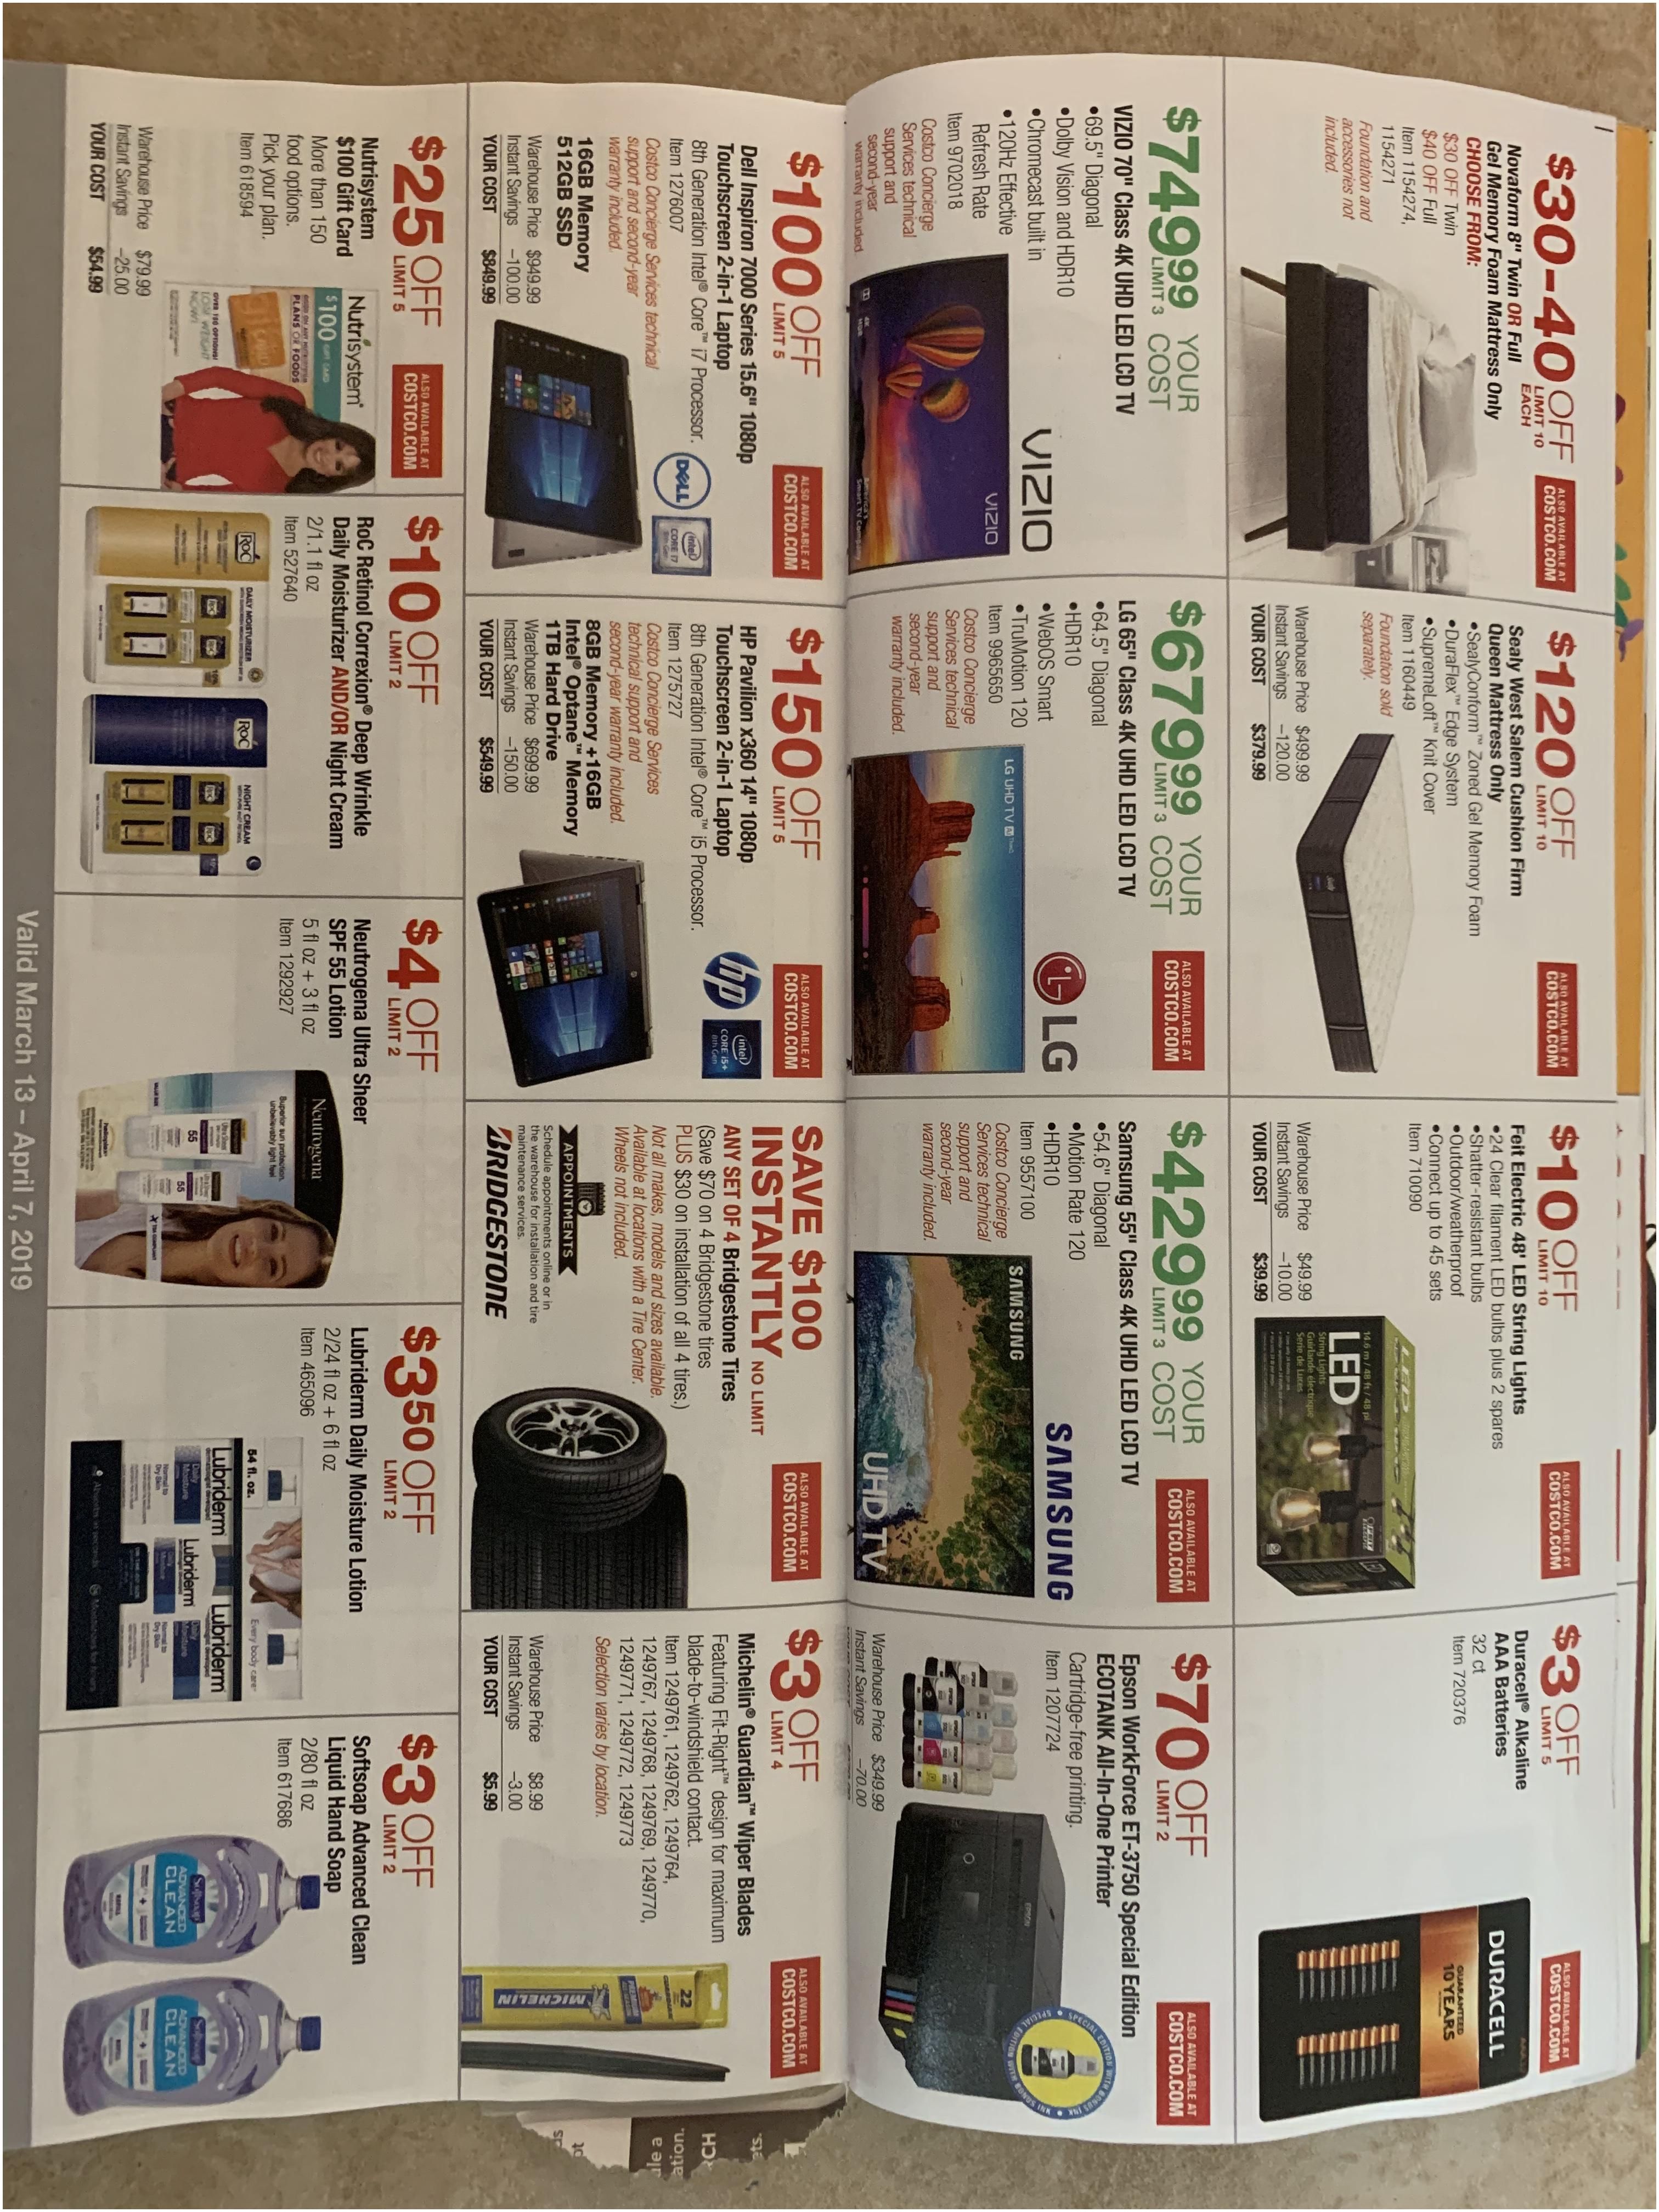 Costco Coupon Book March 2019 Costco March 2019 Coupon Book